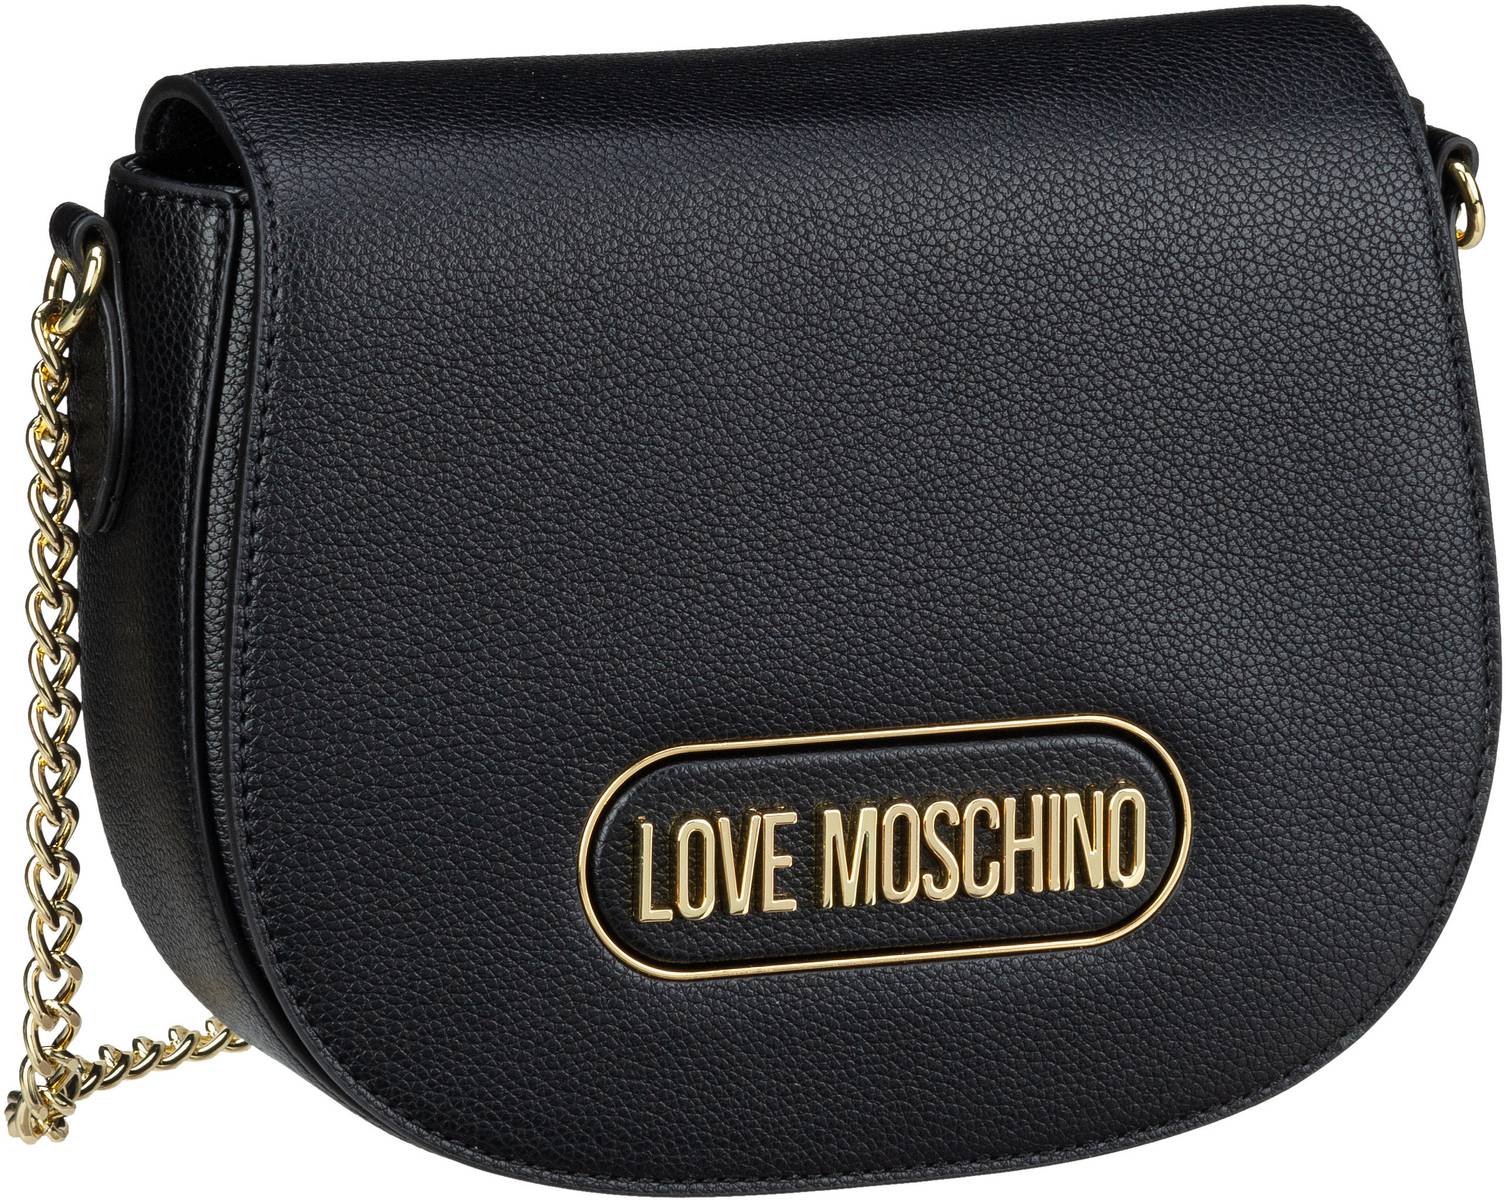 Love Moschino Rounded Plaque 4406 - Black